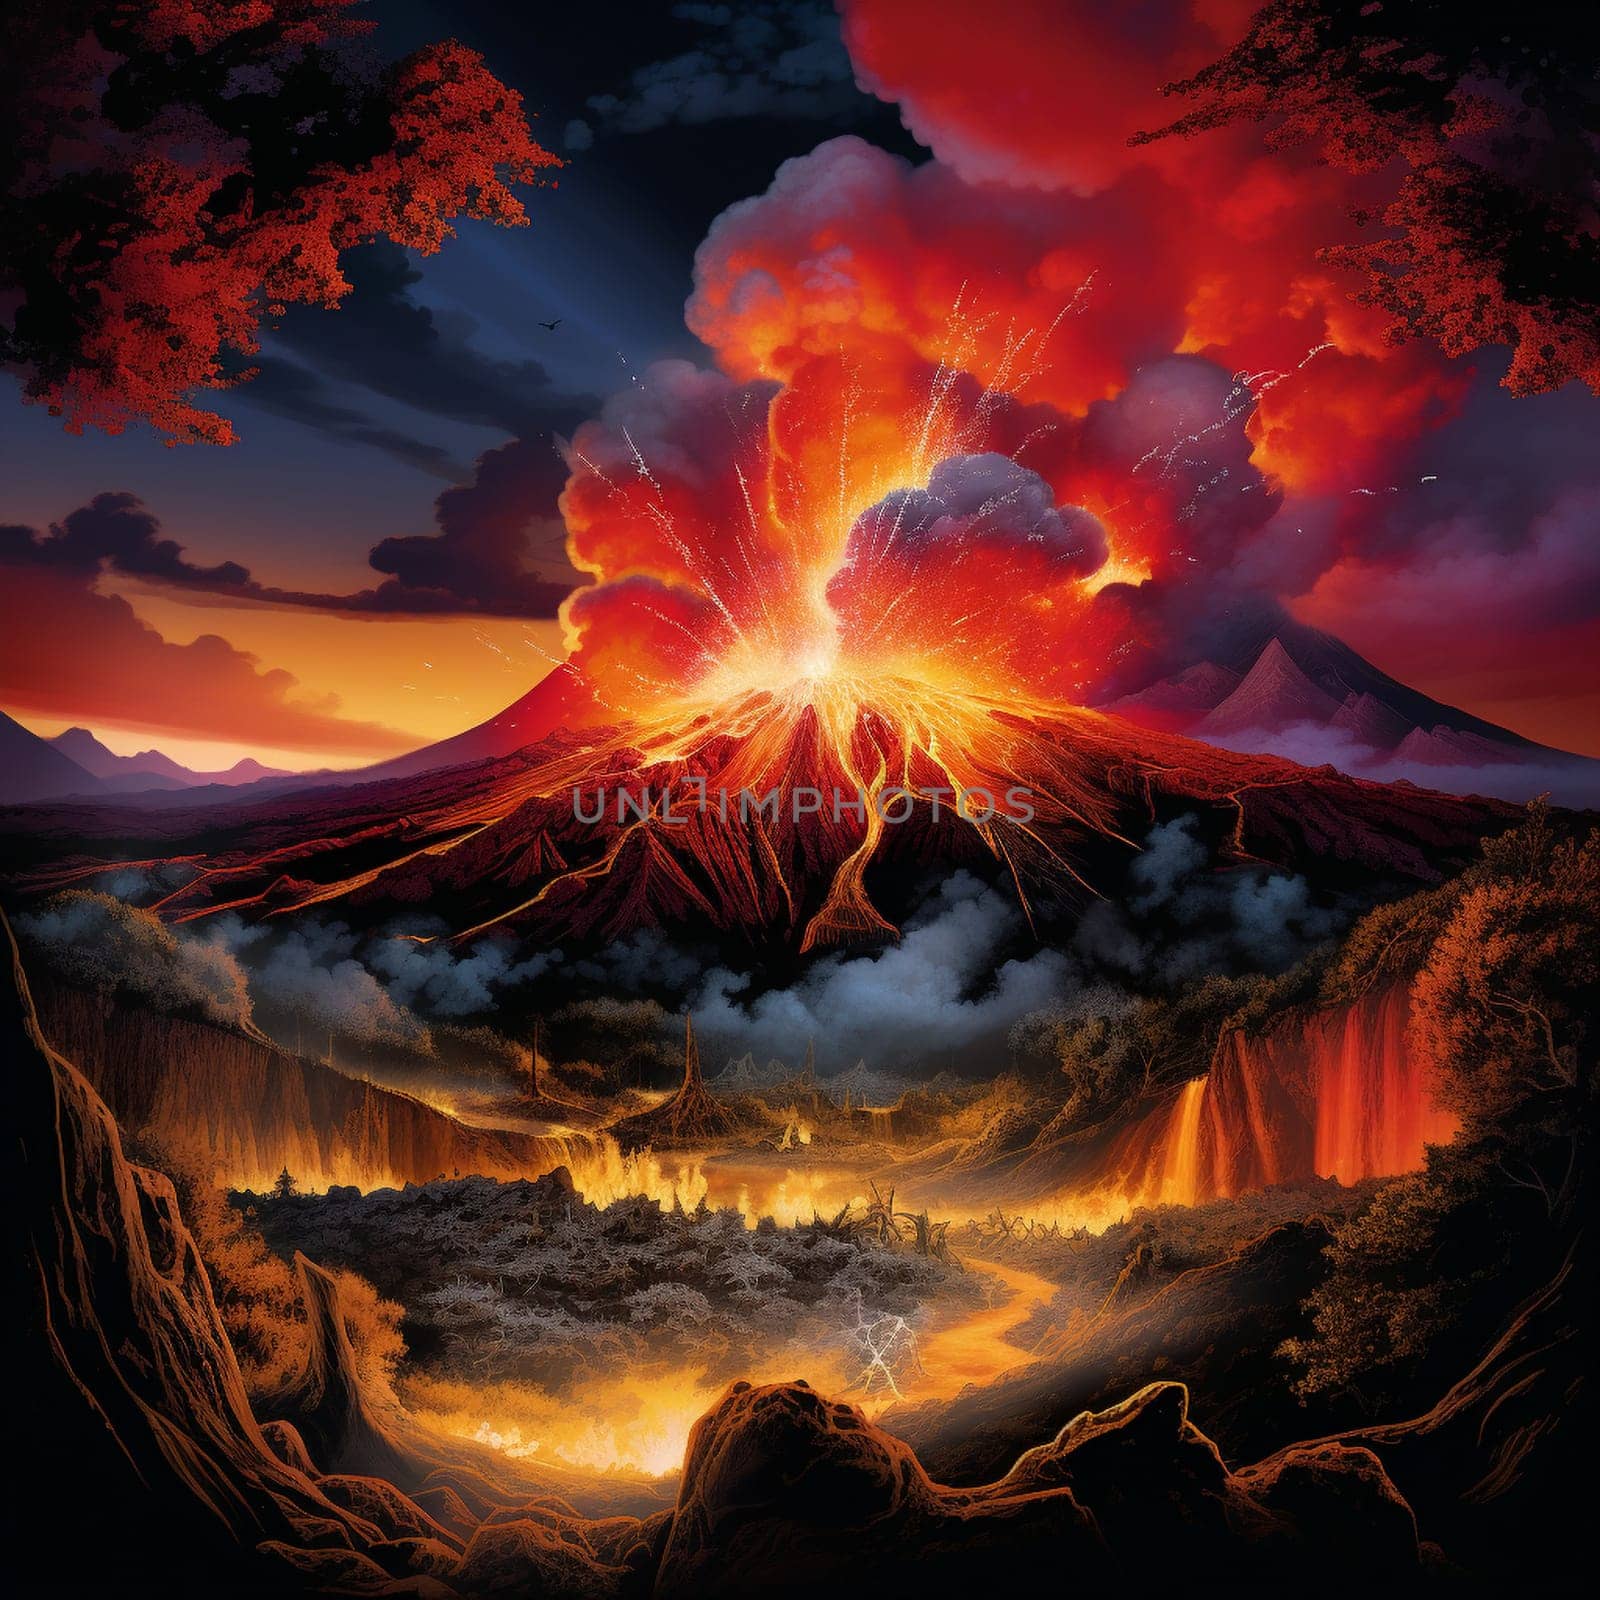 Experience the awe-inspiring beauty of nature with 'Magma's Serenade.' This mesmerizing image depicts a volcanic eruption at twilight, where molten lava gracefully flows down a mountainside, creating an ethereal glow that illuminates the surrounding landscape. The scene epitomizes a delicate harmony between the explosive power of nature and the serene beauty of the moment. Witness glowing ember-like sparks dancing in the air, wisps of smoke gracefully rising, and a star-studded night sky providing a striking backdrop, evoking a range of emotions in viewers. The vibrant and slightly surreal art style captures the scene's splendor, effortlessly captivating all who lay their eyes upon it.